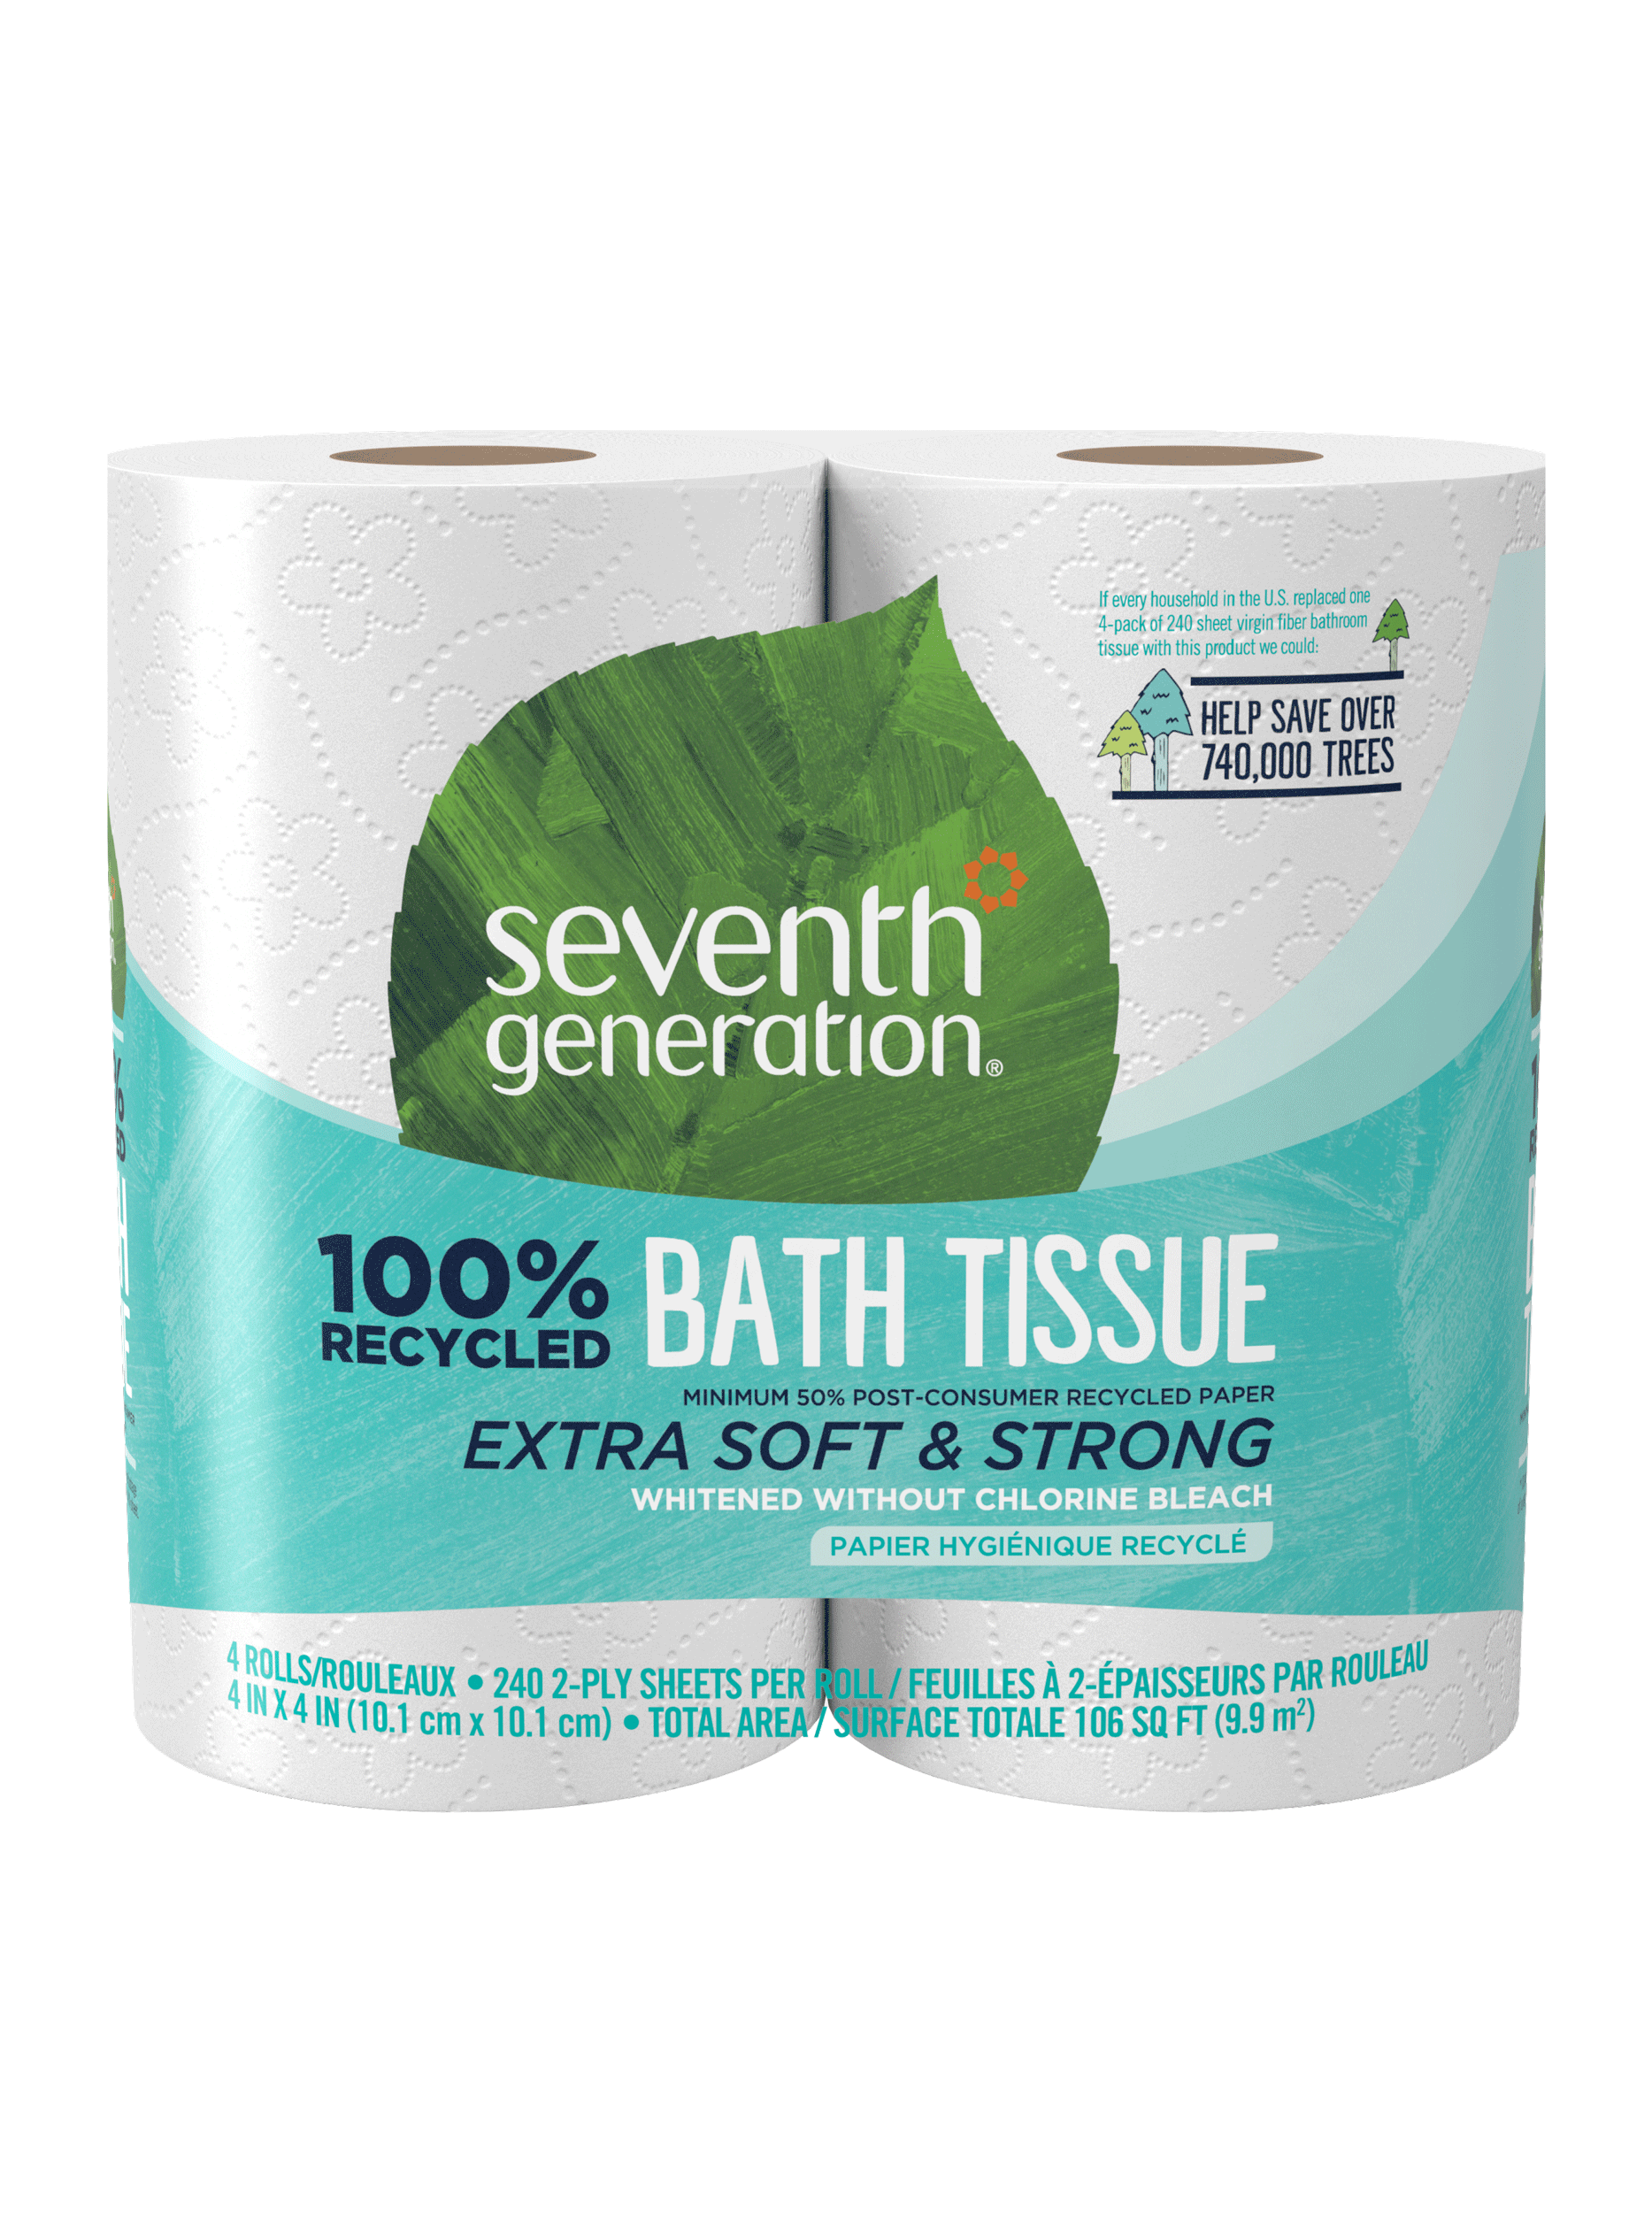 Details about   Toilet Tissue Rolls Bathroom Paper Soft 100% Recycled 2-Ply Unscented Strong Big 